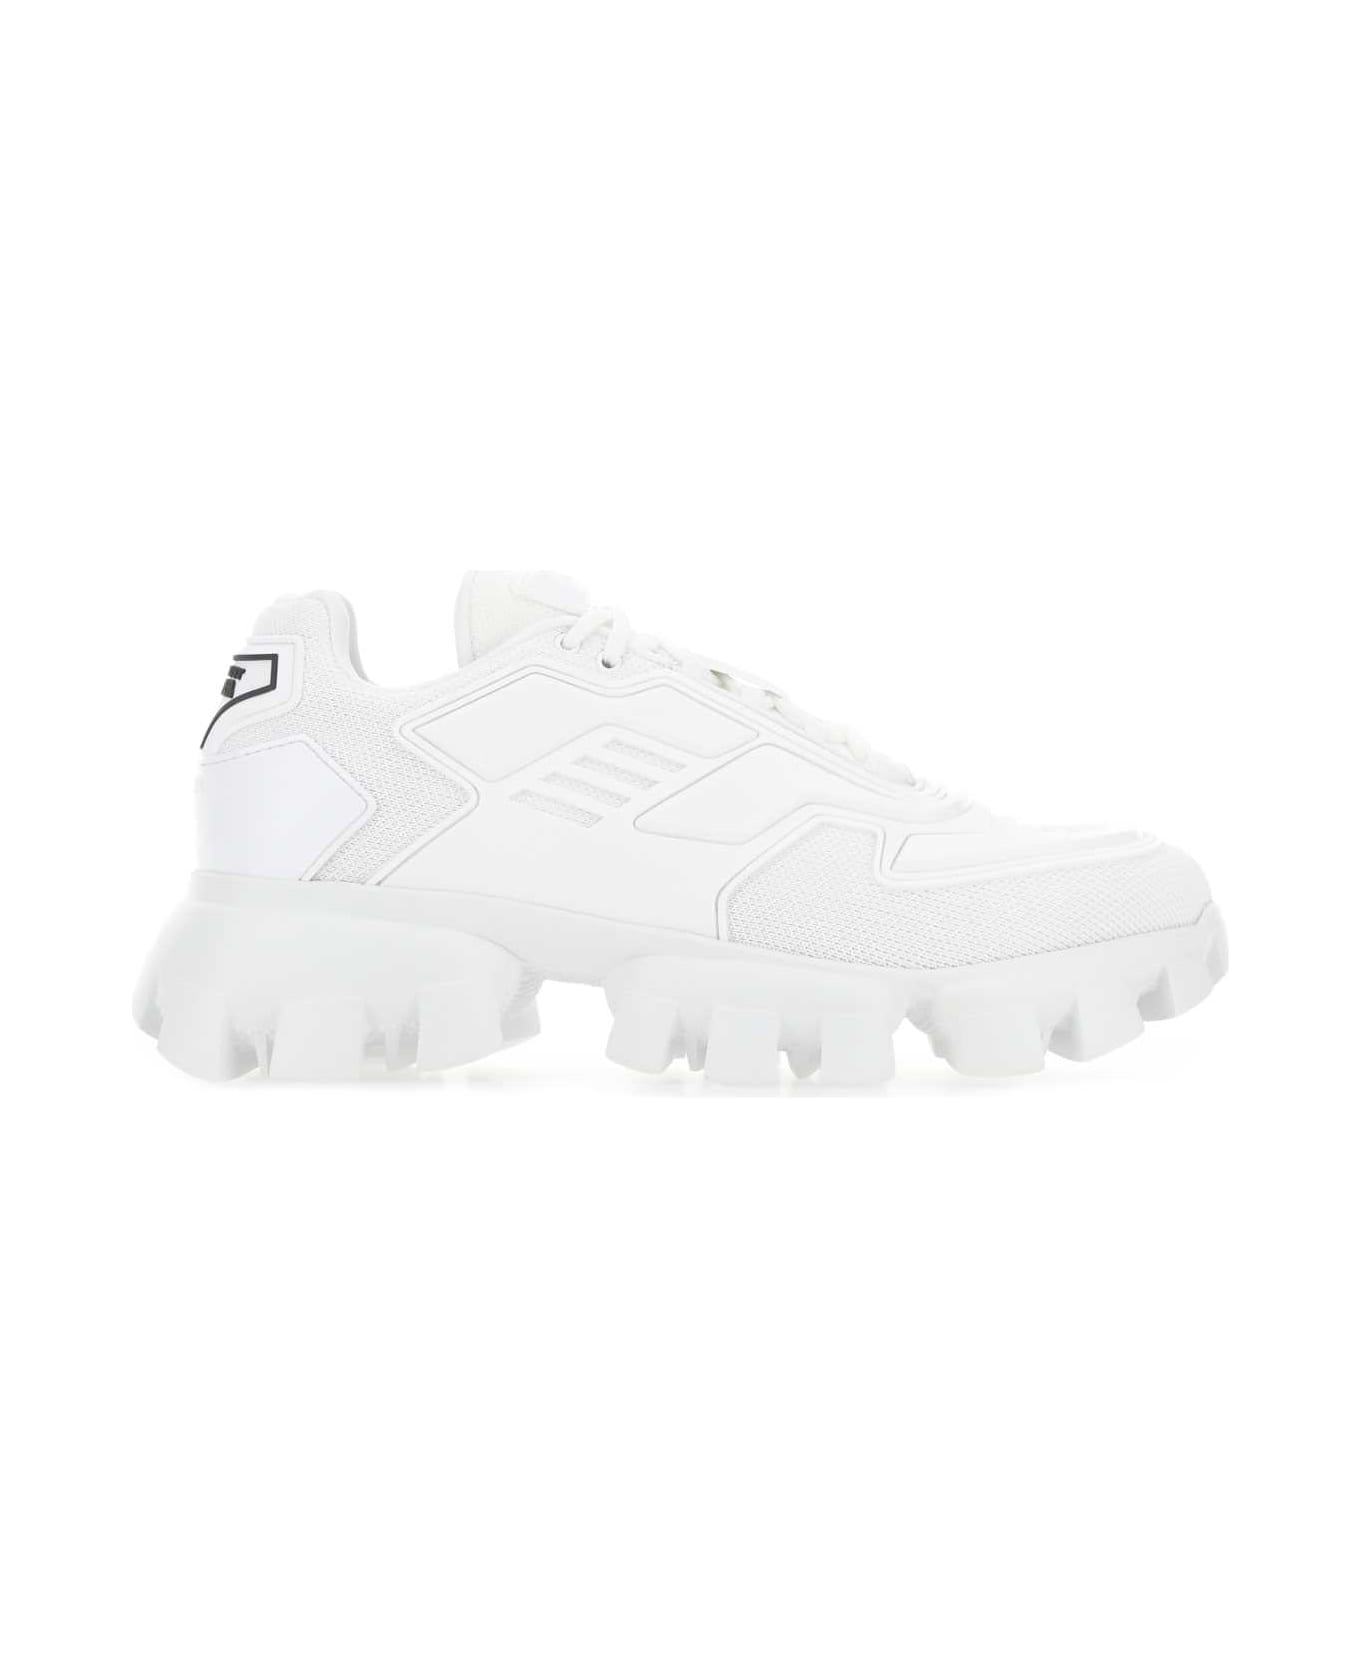 Prada White Rubber And Mesh Cloudbust Thunder Sneakers - F0009